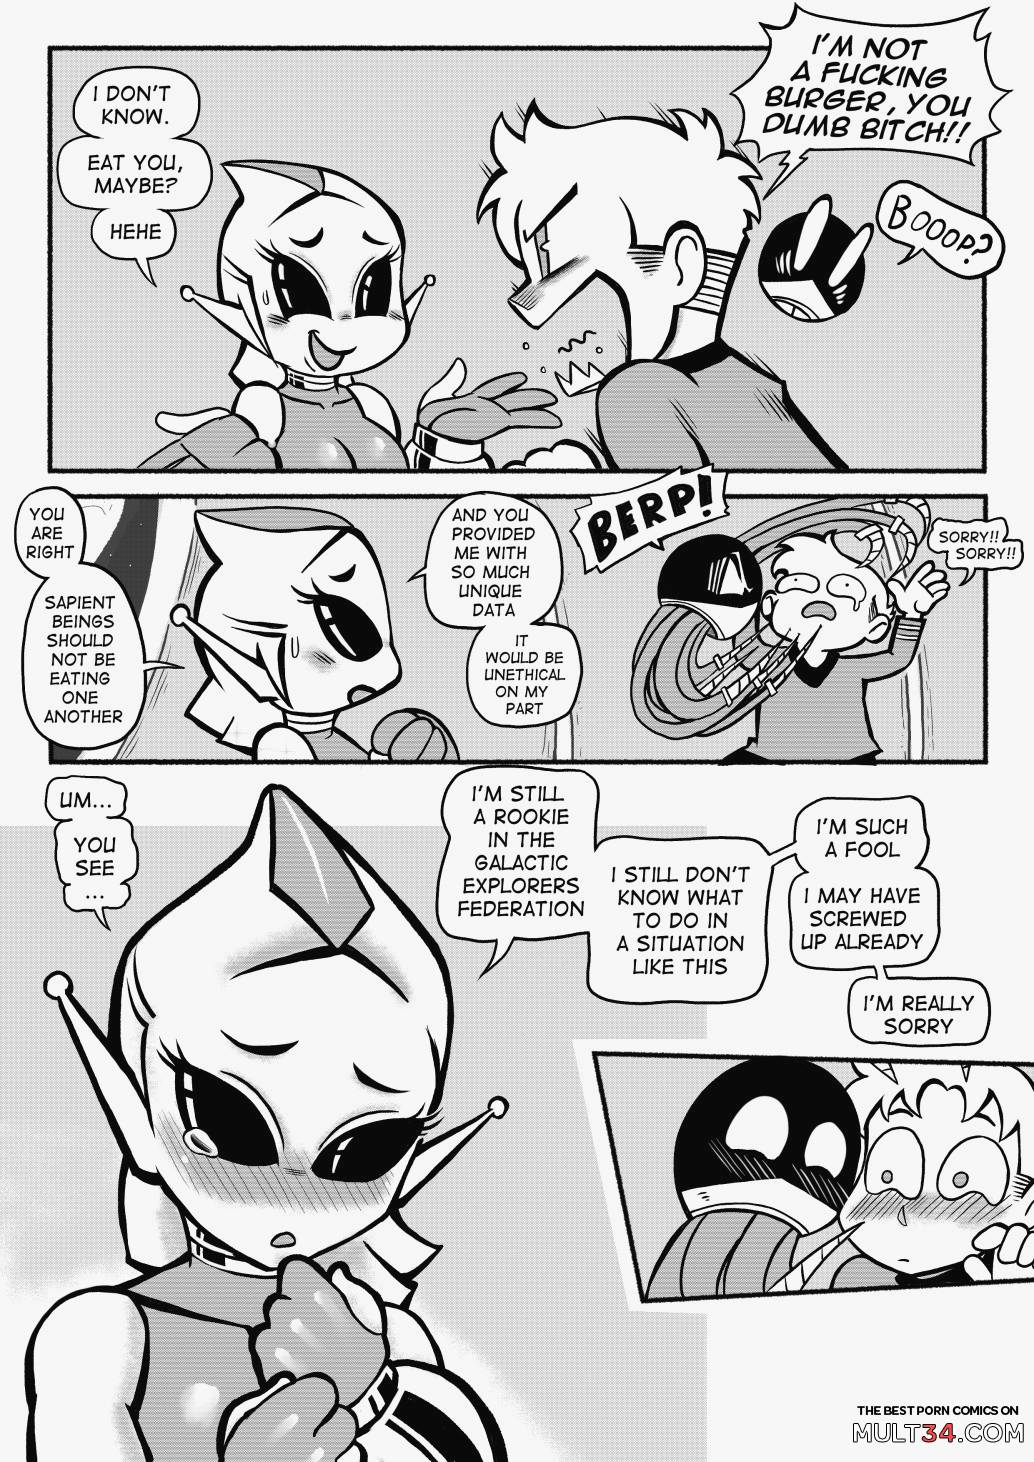 Abducted! - Mr.E page 10